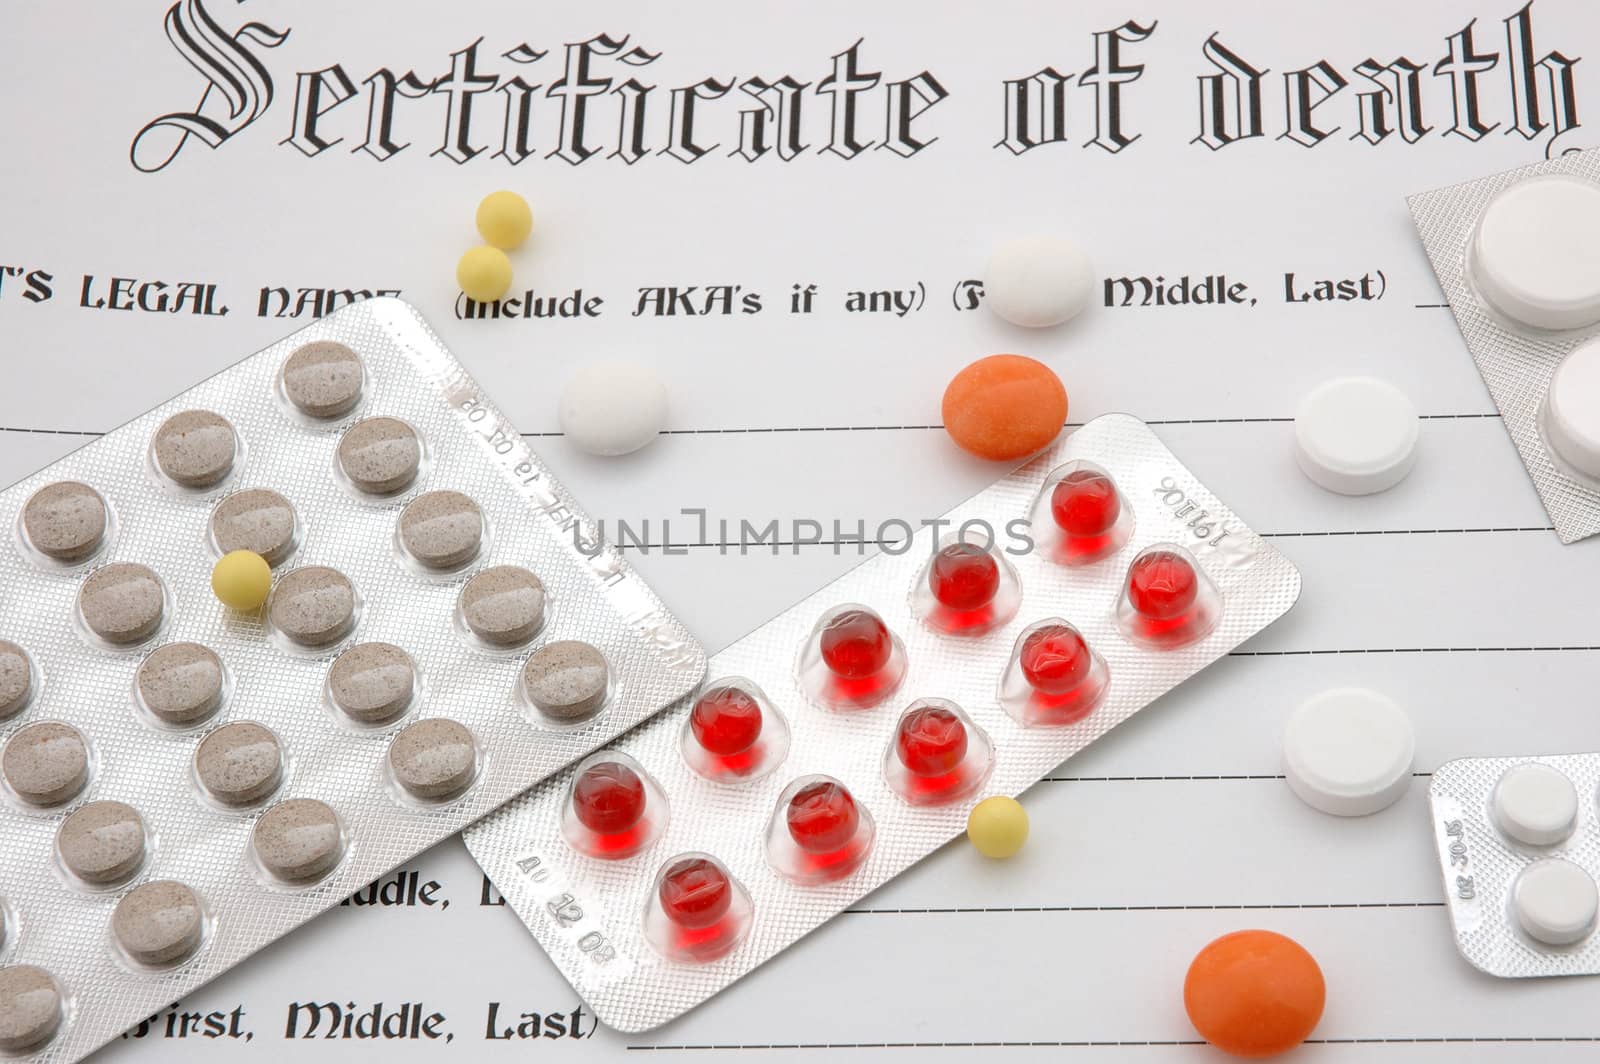 Certificate of death with cause of death "Overdose" and many pills (drugs).